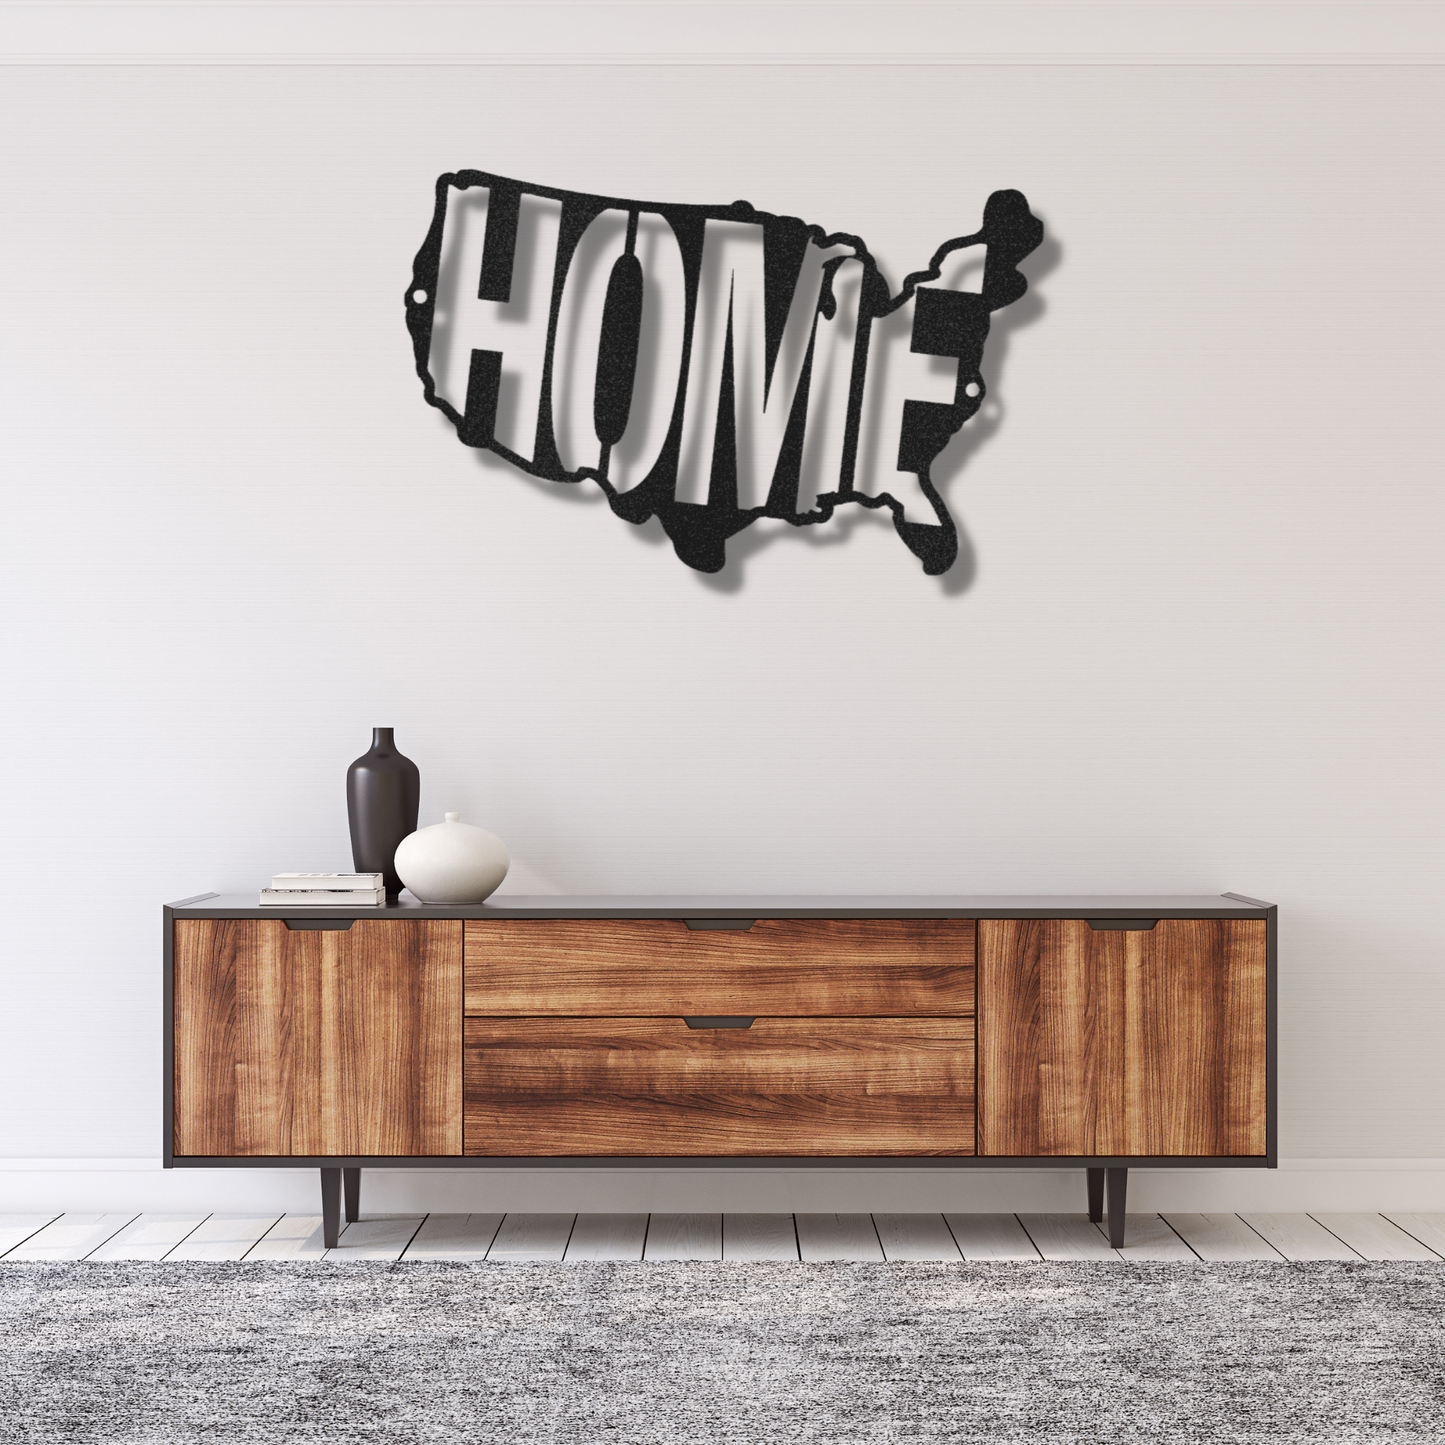 USA Home - Steel Sign, Personalized Metal Wall Decor, House Decor, Wall Art,  Metal Signs, Metal Decorative Sign, Metal Monogram